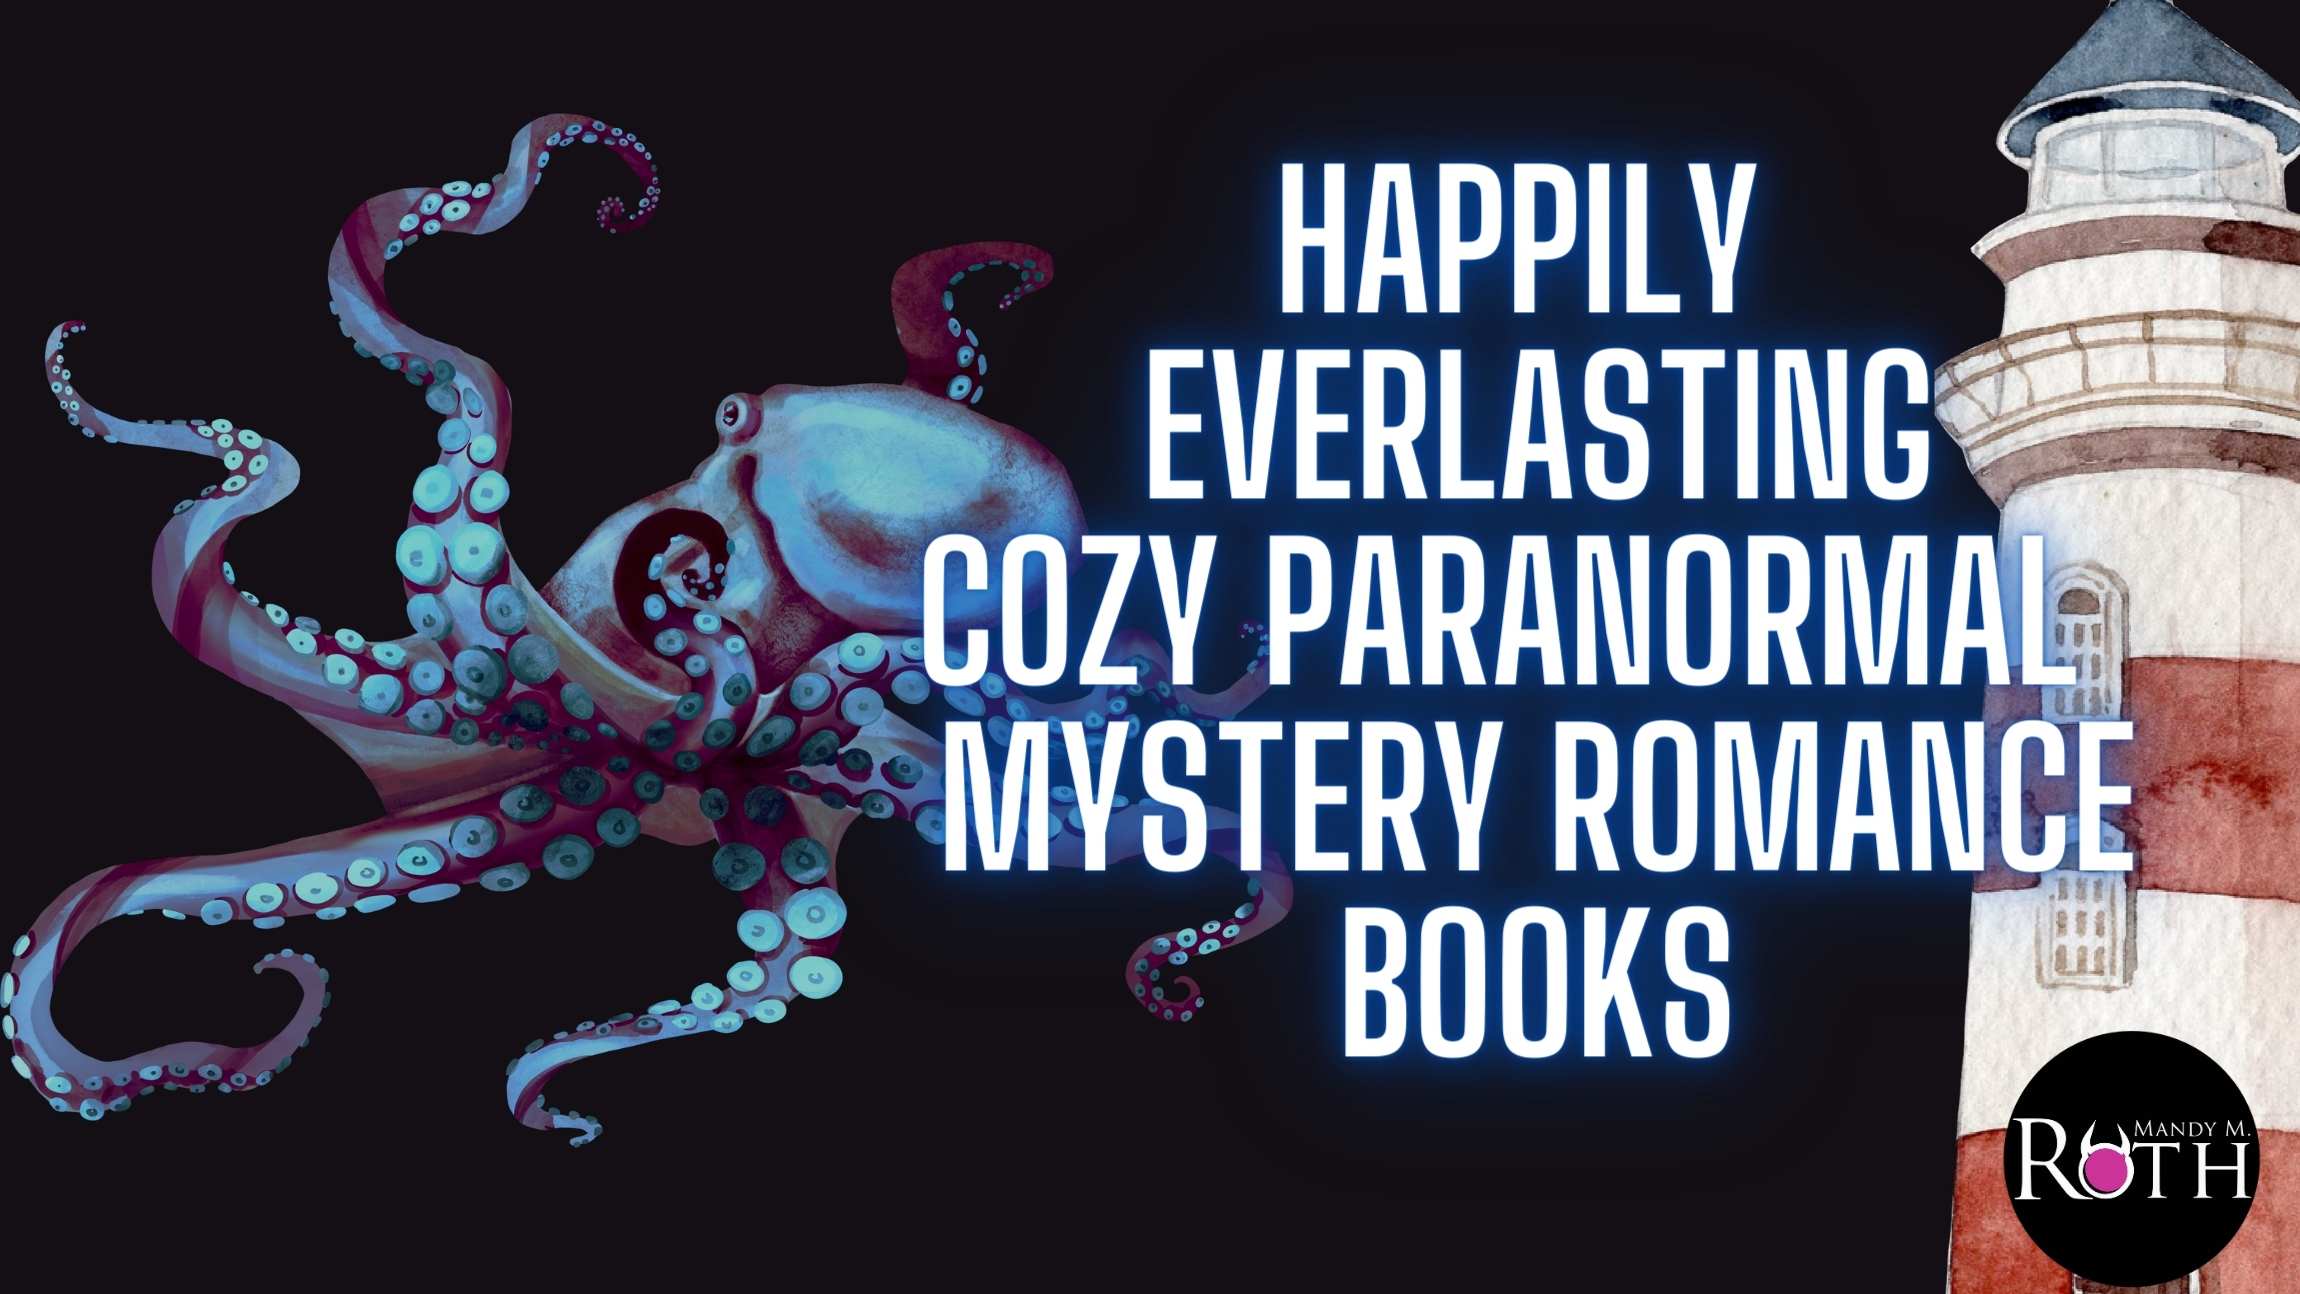 Happily Everlasting Cozy Paranormal mystery ROMANCE Books